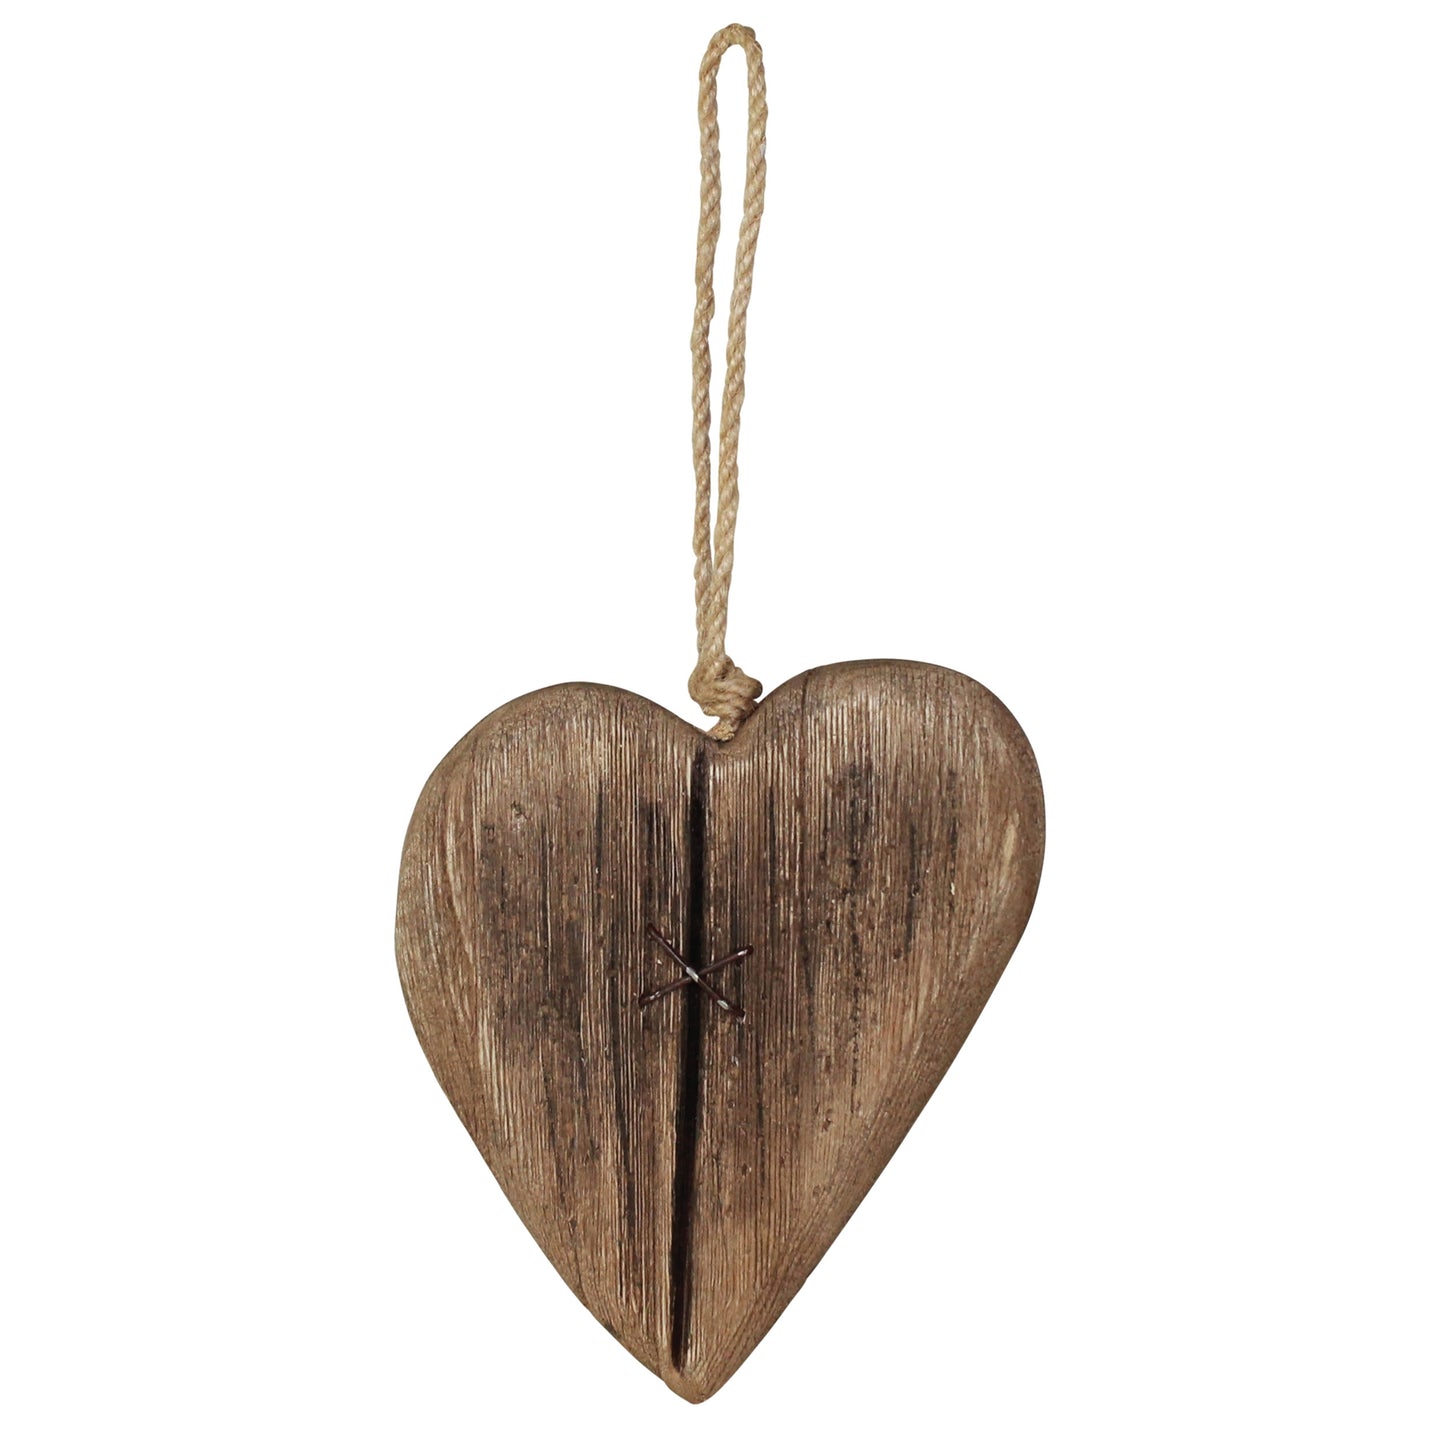 Mended Wood Heart